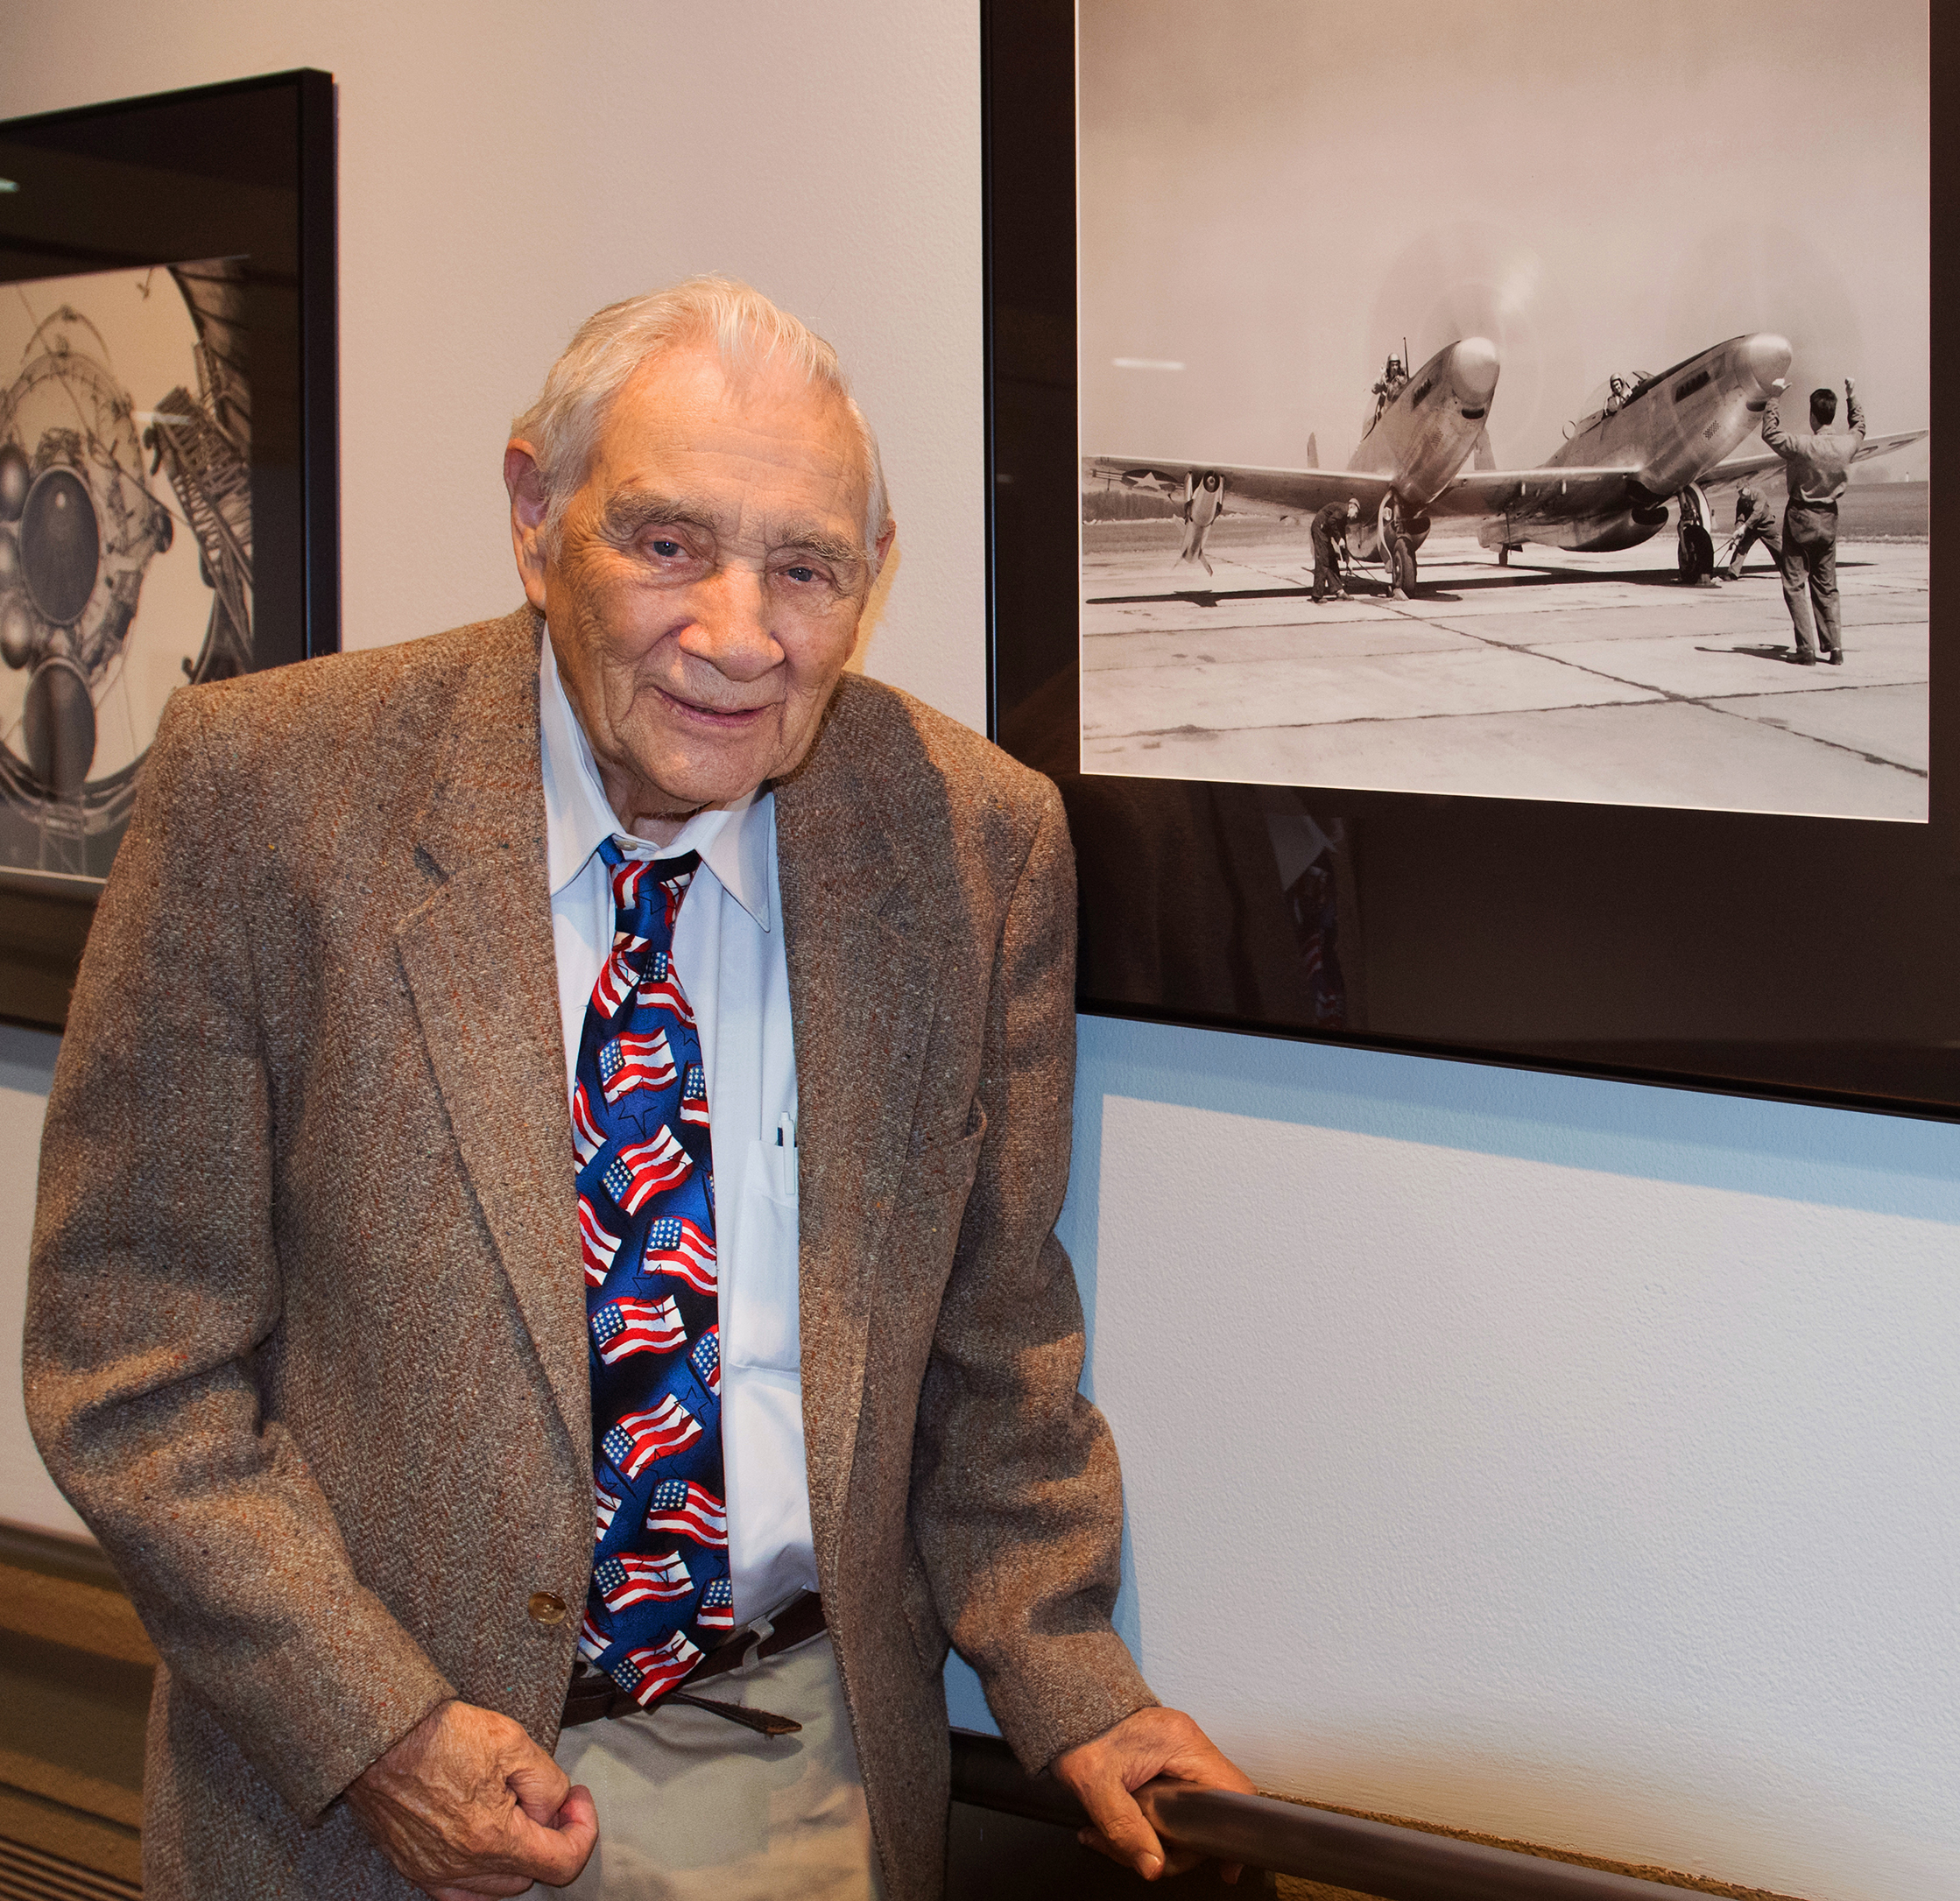 Elderly gentleman poses next to an old photograph displayed on a wall.